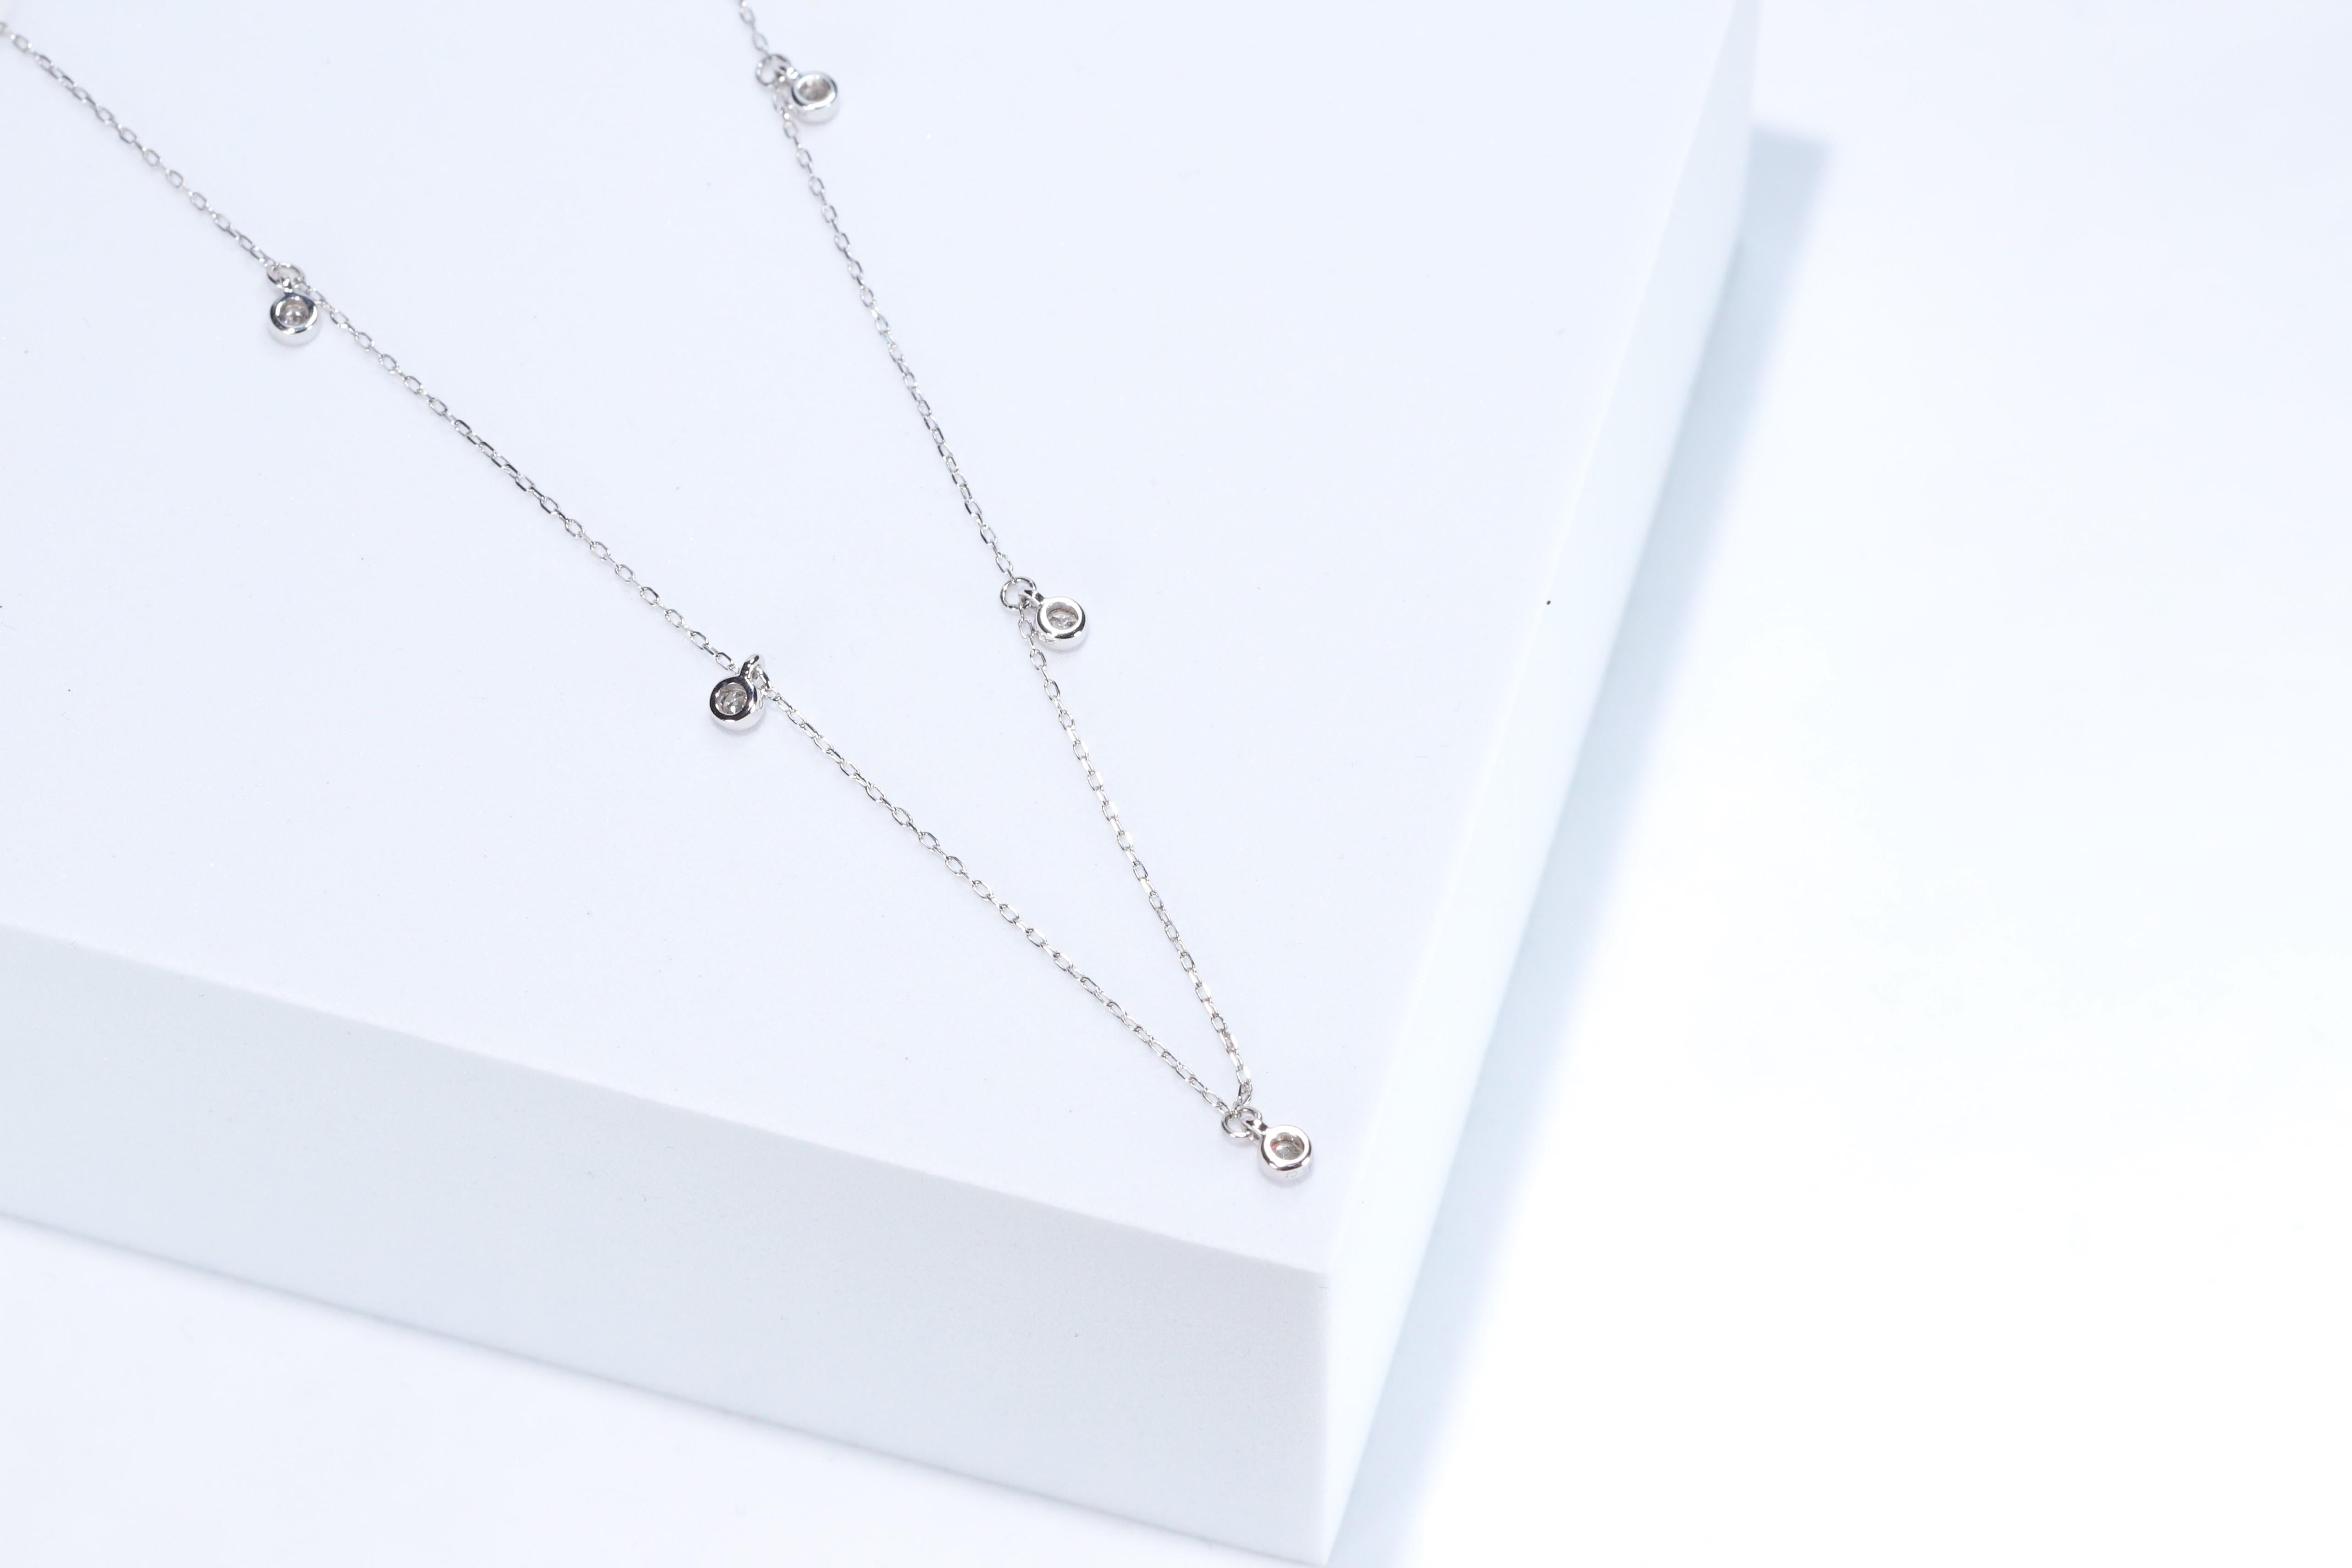 Stunning, timeless and classy eternity Unique Necklace. Decorate yourself in luxury with this Gin & Grace Necklace. The 14K White Gold jewelry boasts with Natural Round-cut white Diamond (5 Pcs) 0.23 Carat accent stones for a lovely design. This